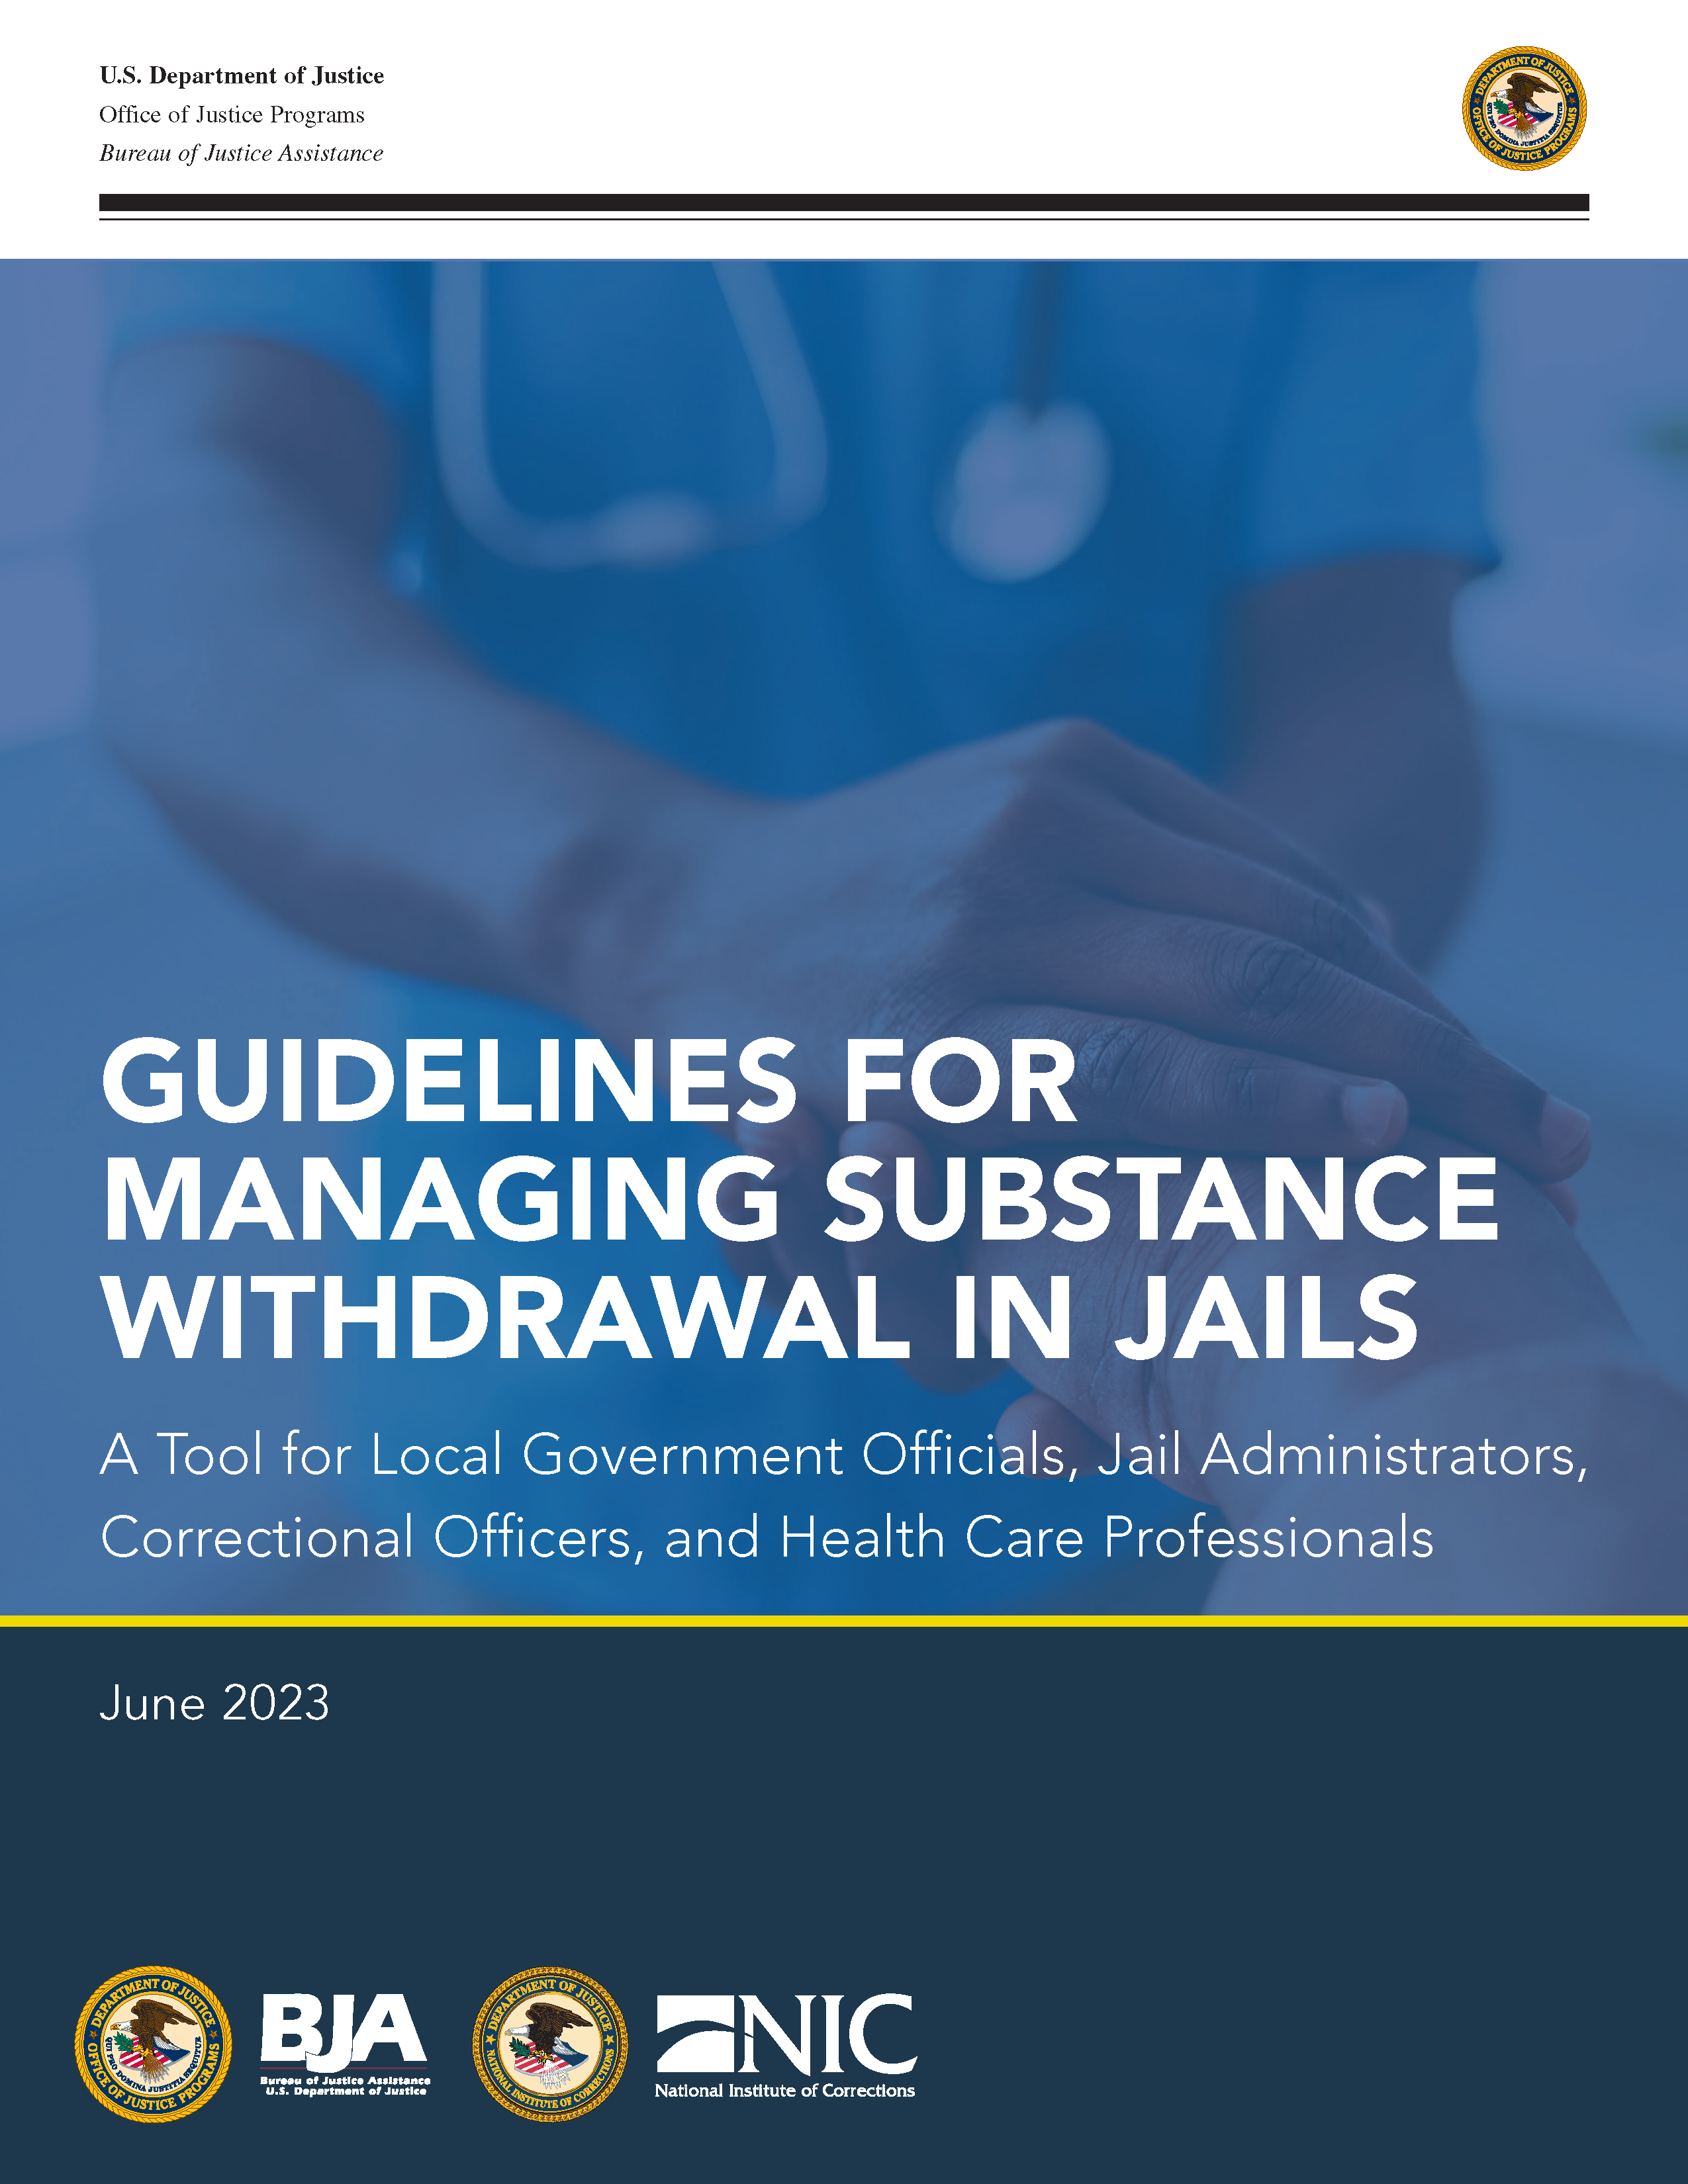 Guidelines for Managing Substance Withdrawal in Jails: A Tool for Local Government Officials, Jail Administrators, Correctional Officers, and Health Care Professionals